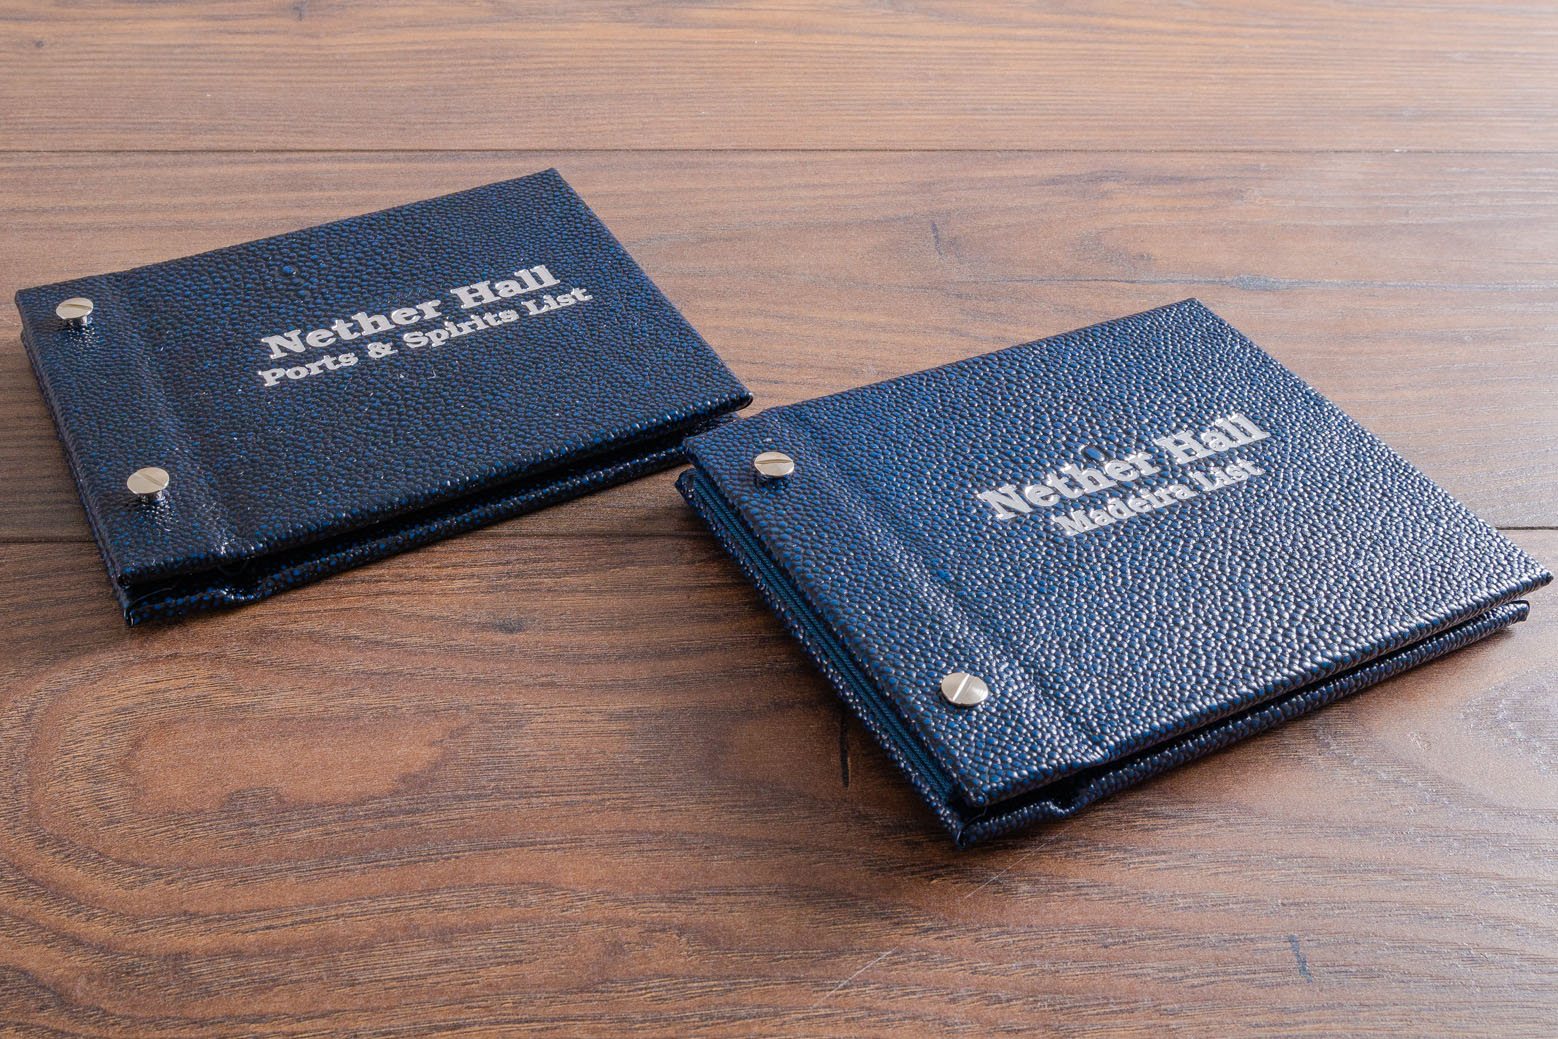 Luxury leather drinks and cocktail menus in Shagreen leather with foil embossing